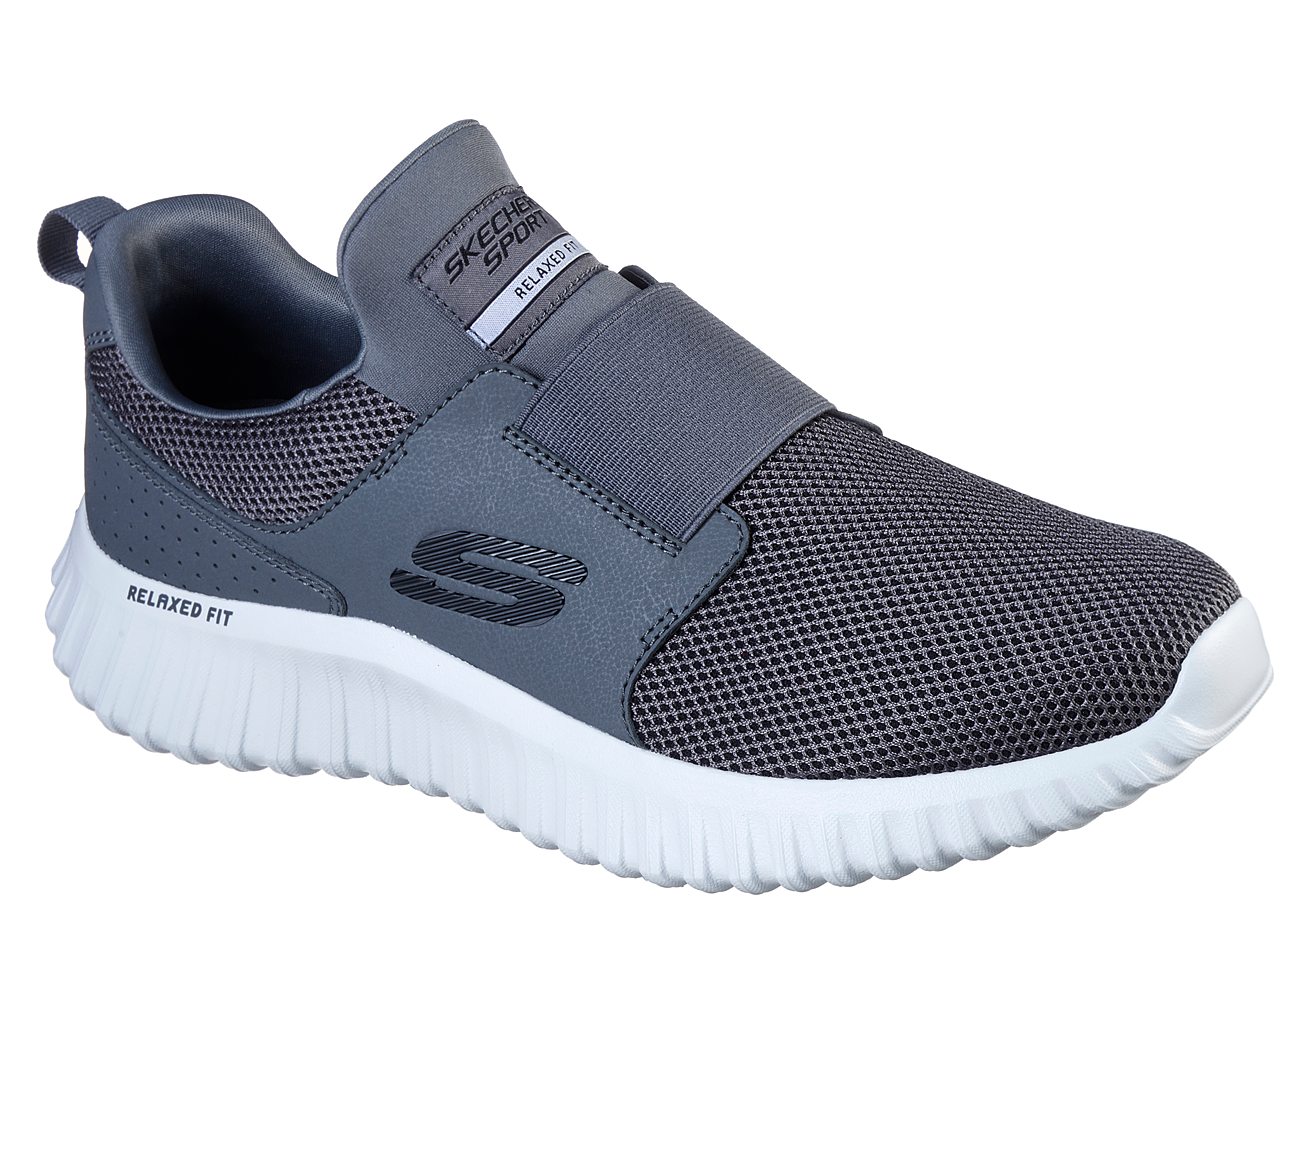 Skechers - Mens Depth Charge 2.0 - Shoes